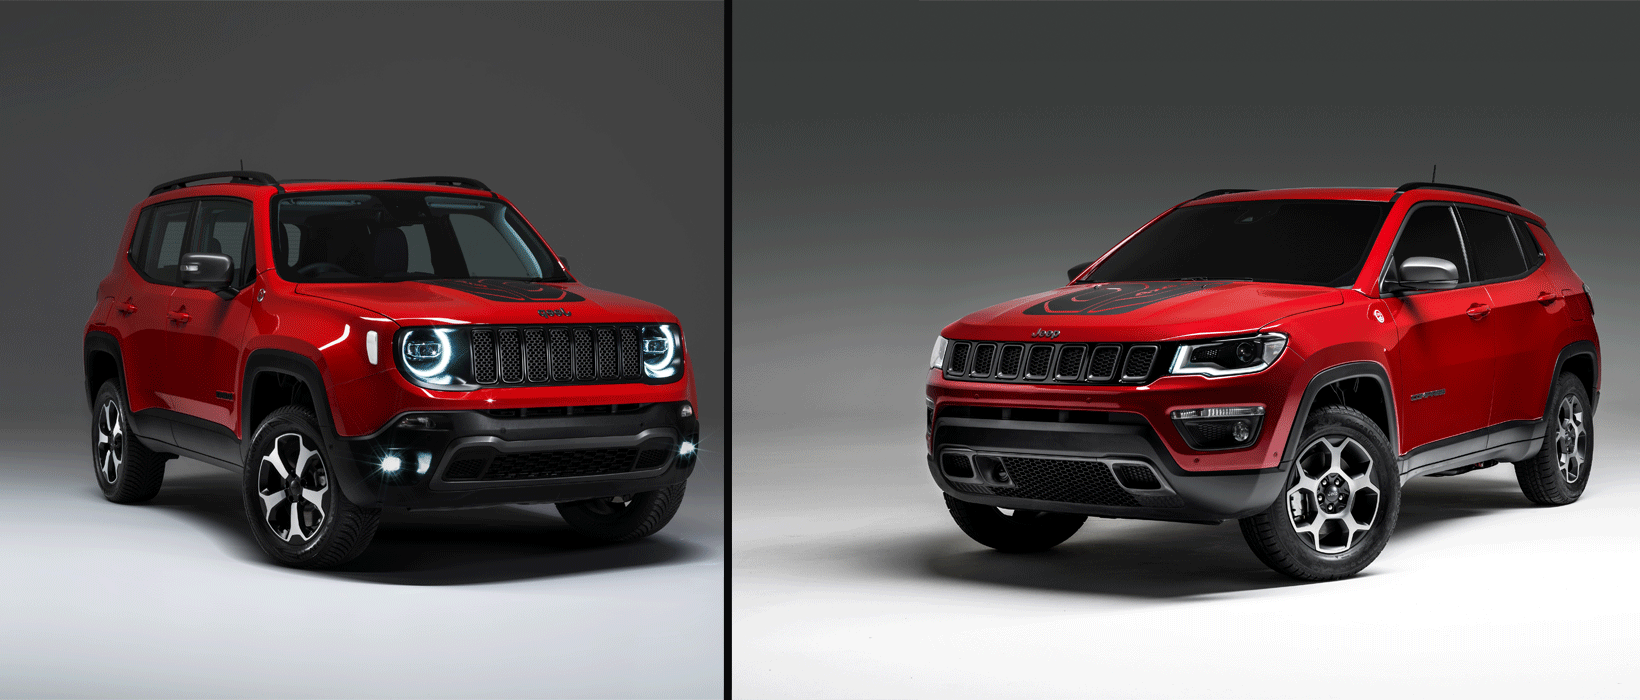 Hybrid Jeep Renegade and Compass models showcased at the Geneva Motor Show